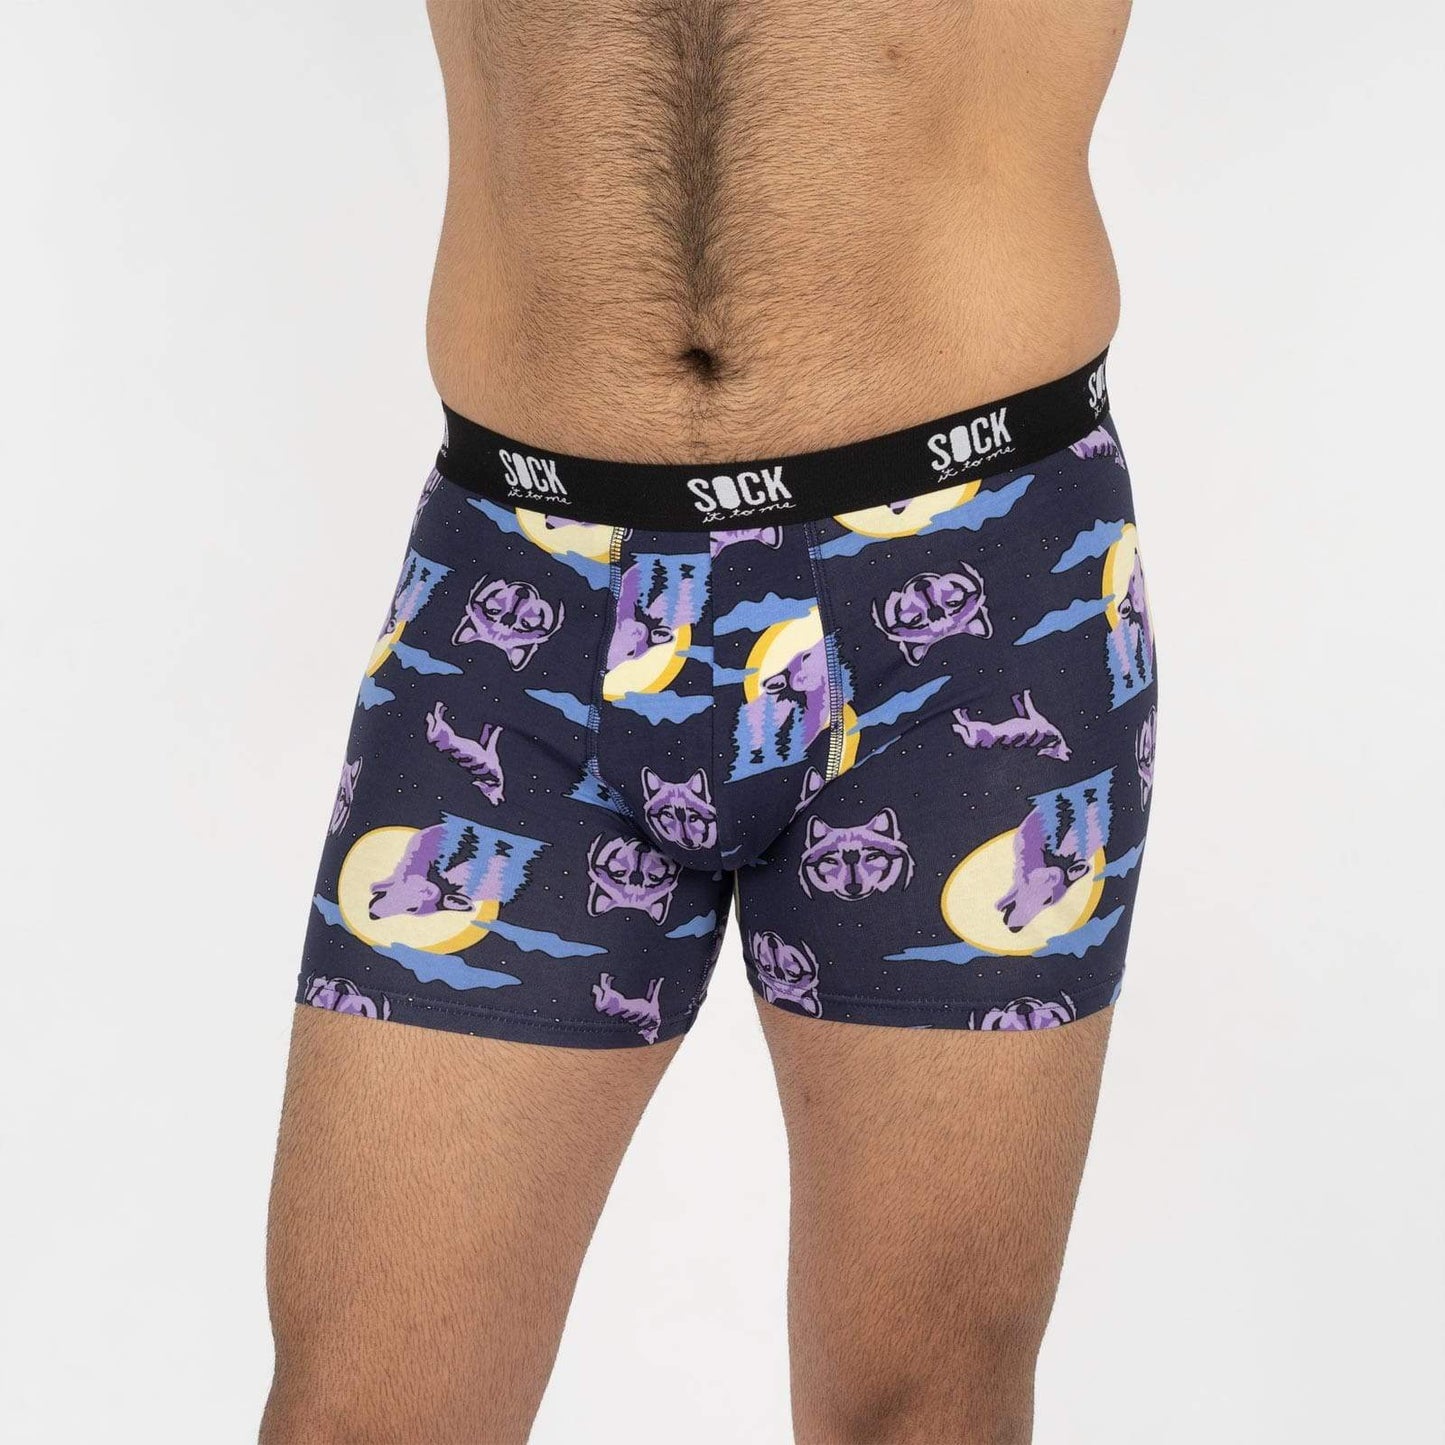 Sock it to Me 6 Wolf Moon Mens Boxers